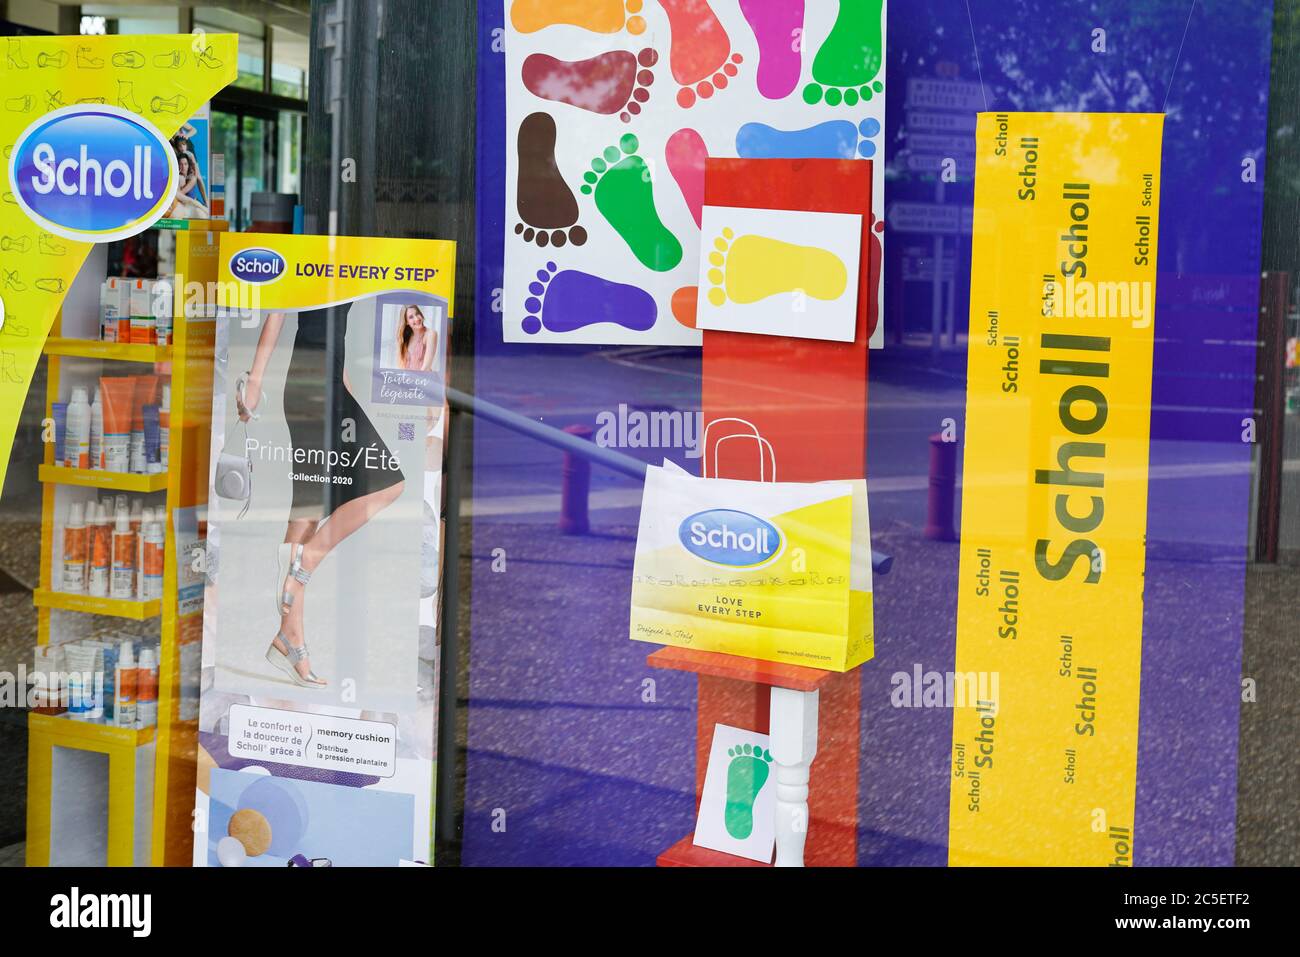 Bordeaux , Aquitaine / France - 06 14 2020 : Scholl logo sign in shop for  Foot shoes and accessories Stock Photo - Alamy